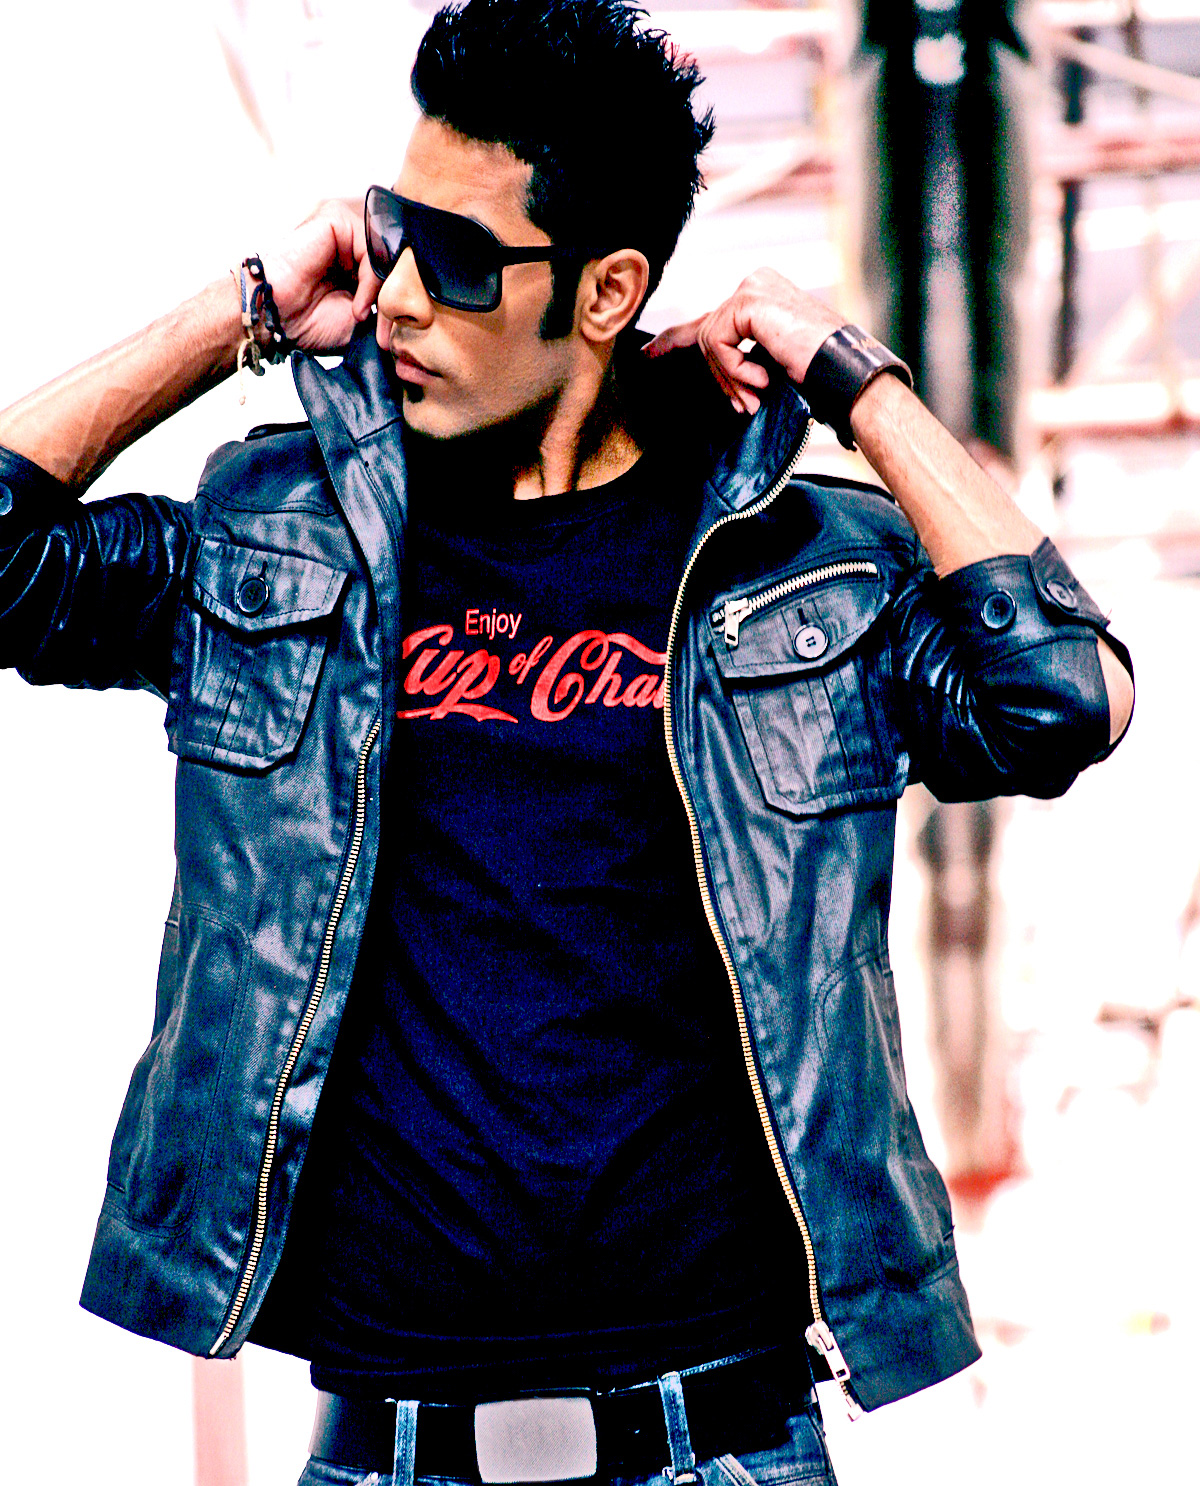 Cup of Chai t.shirt worn by South Asian male model.